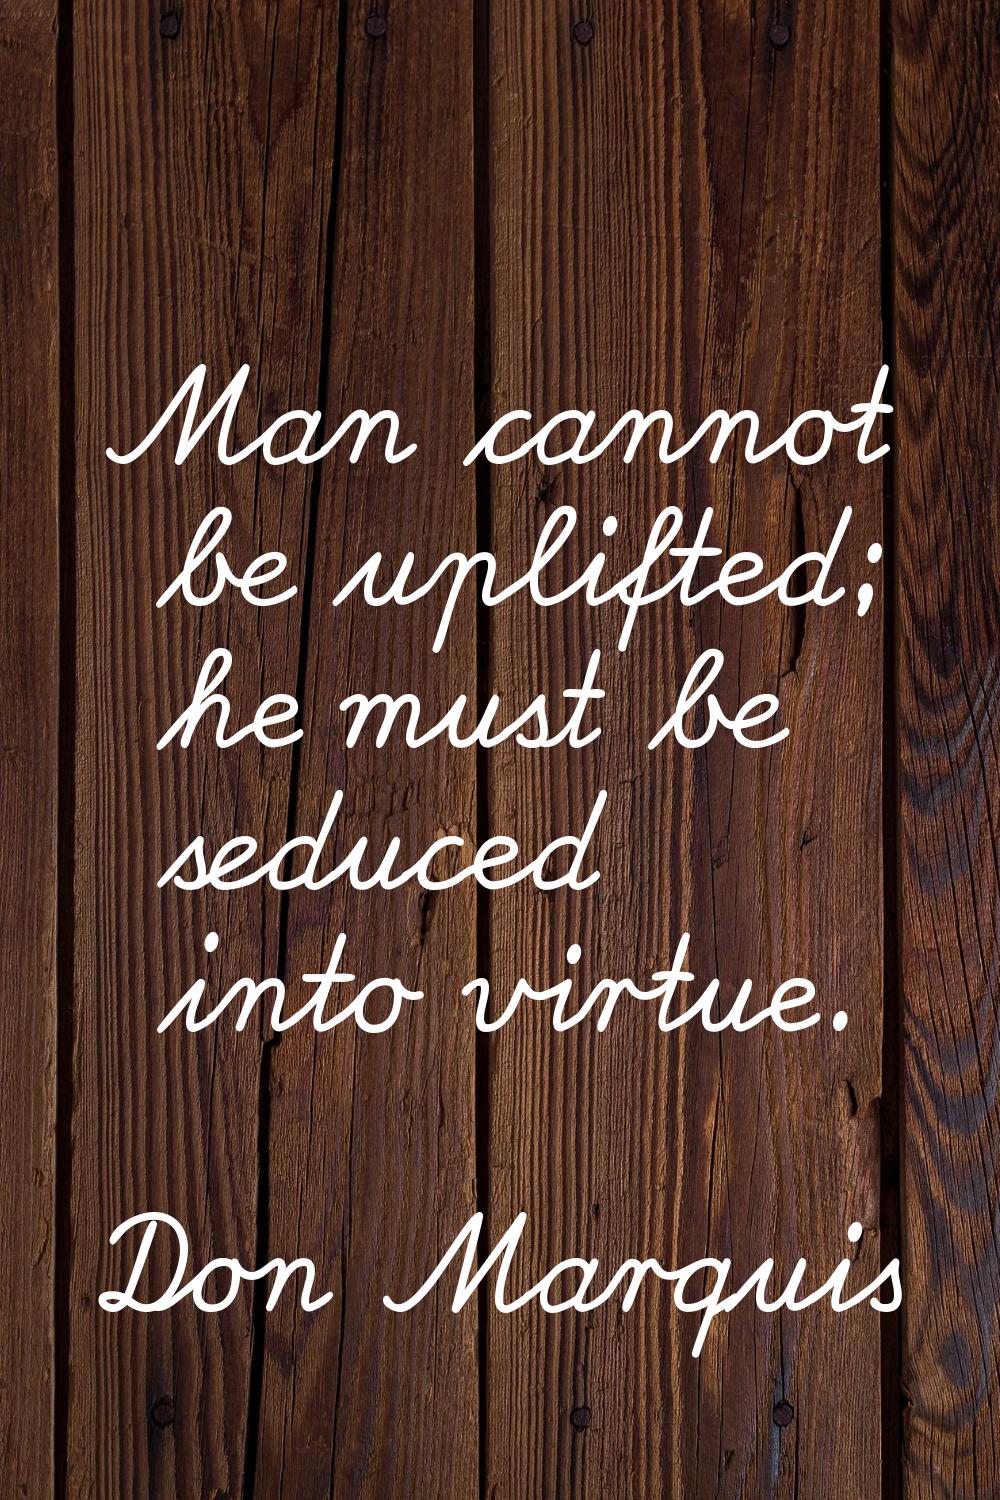 Man cannot be uplifted; he must be seduced into virtue.